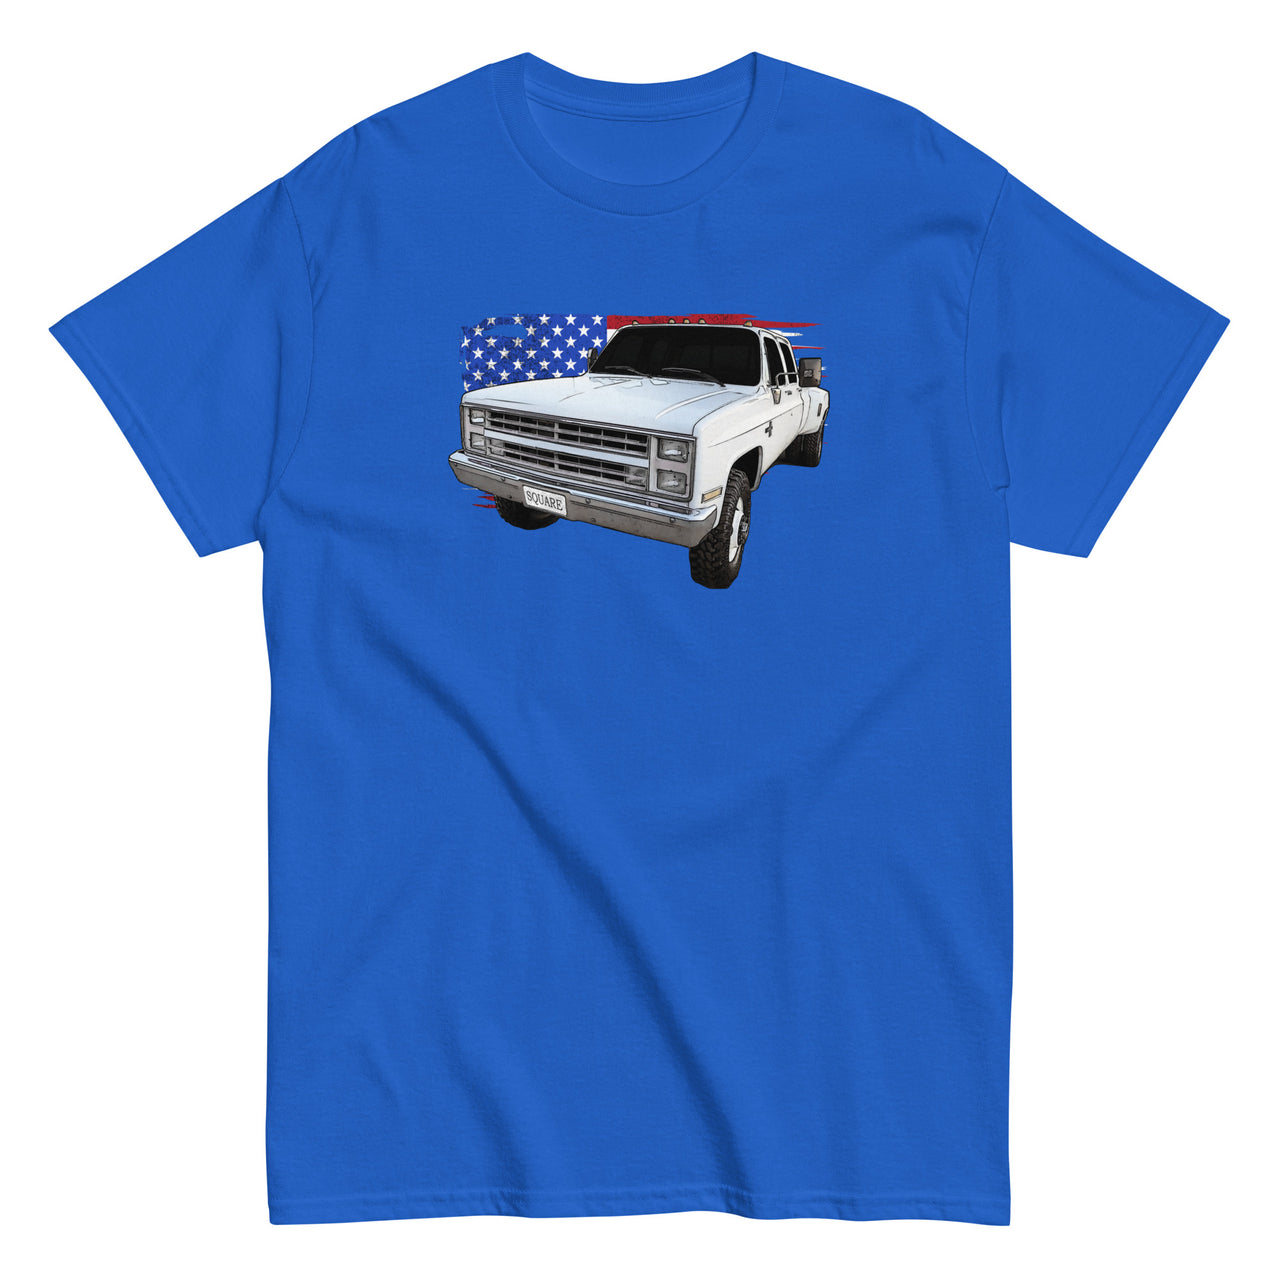 Square Body Dually Crew Cab T-Shirt in royal